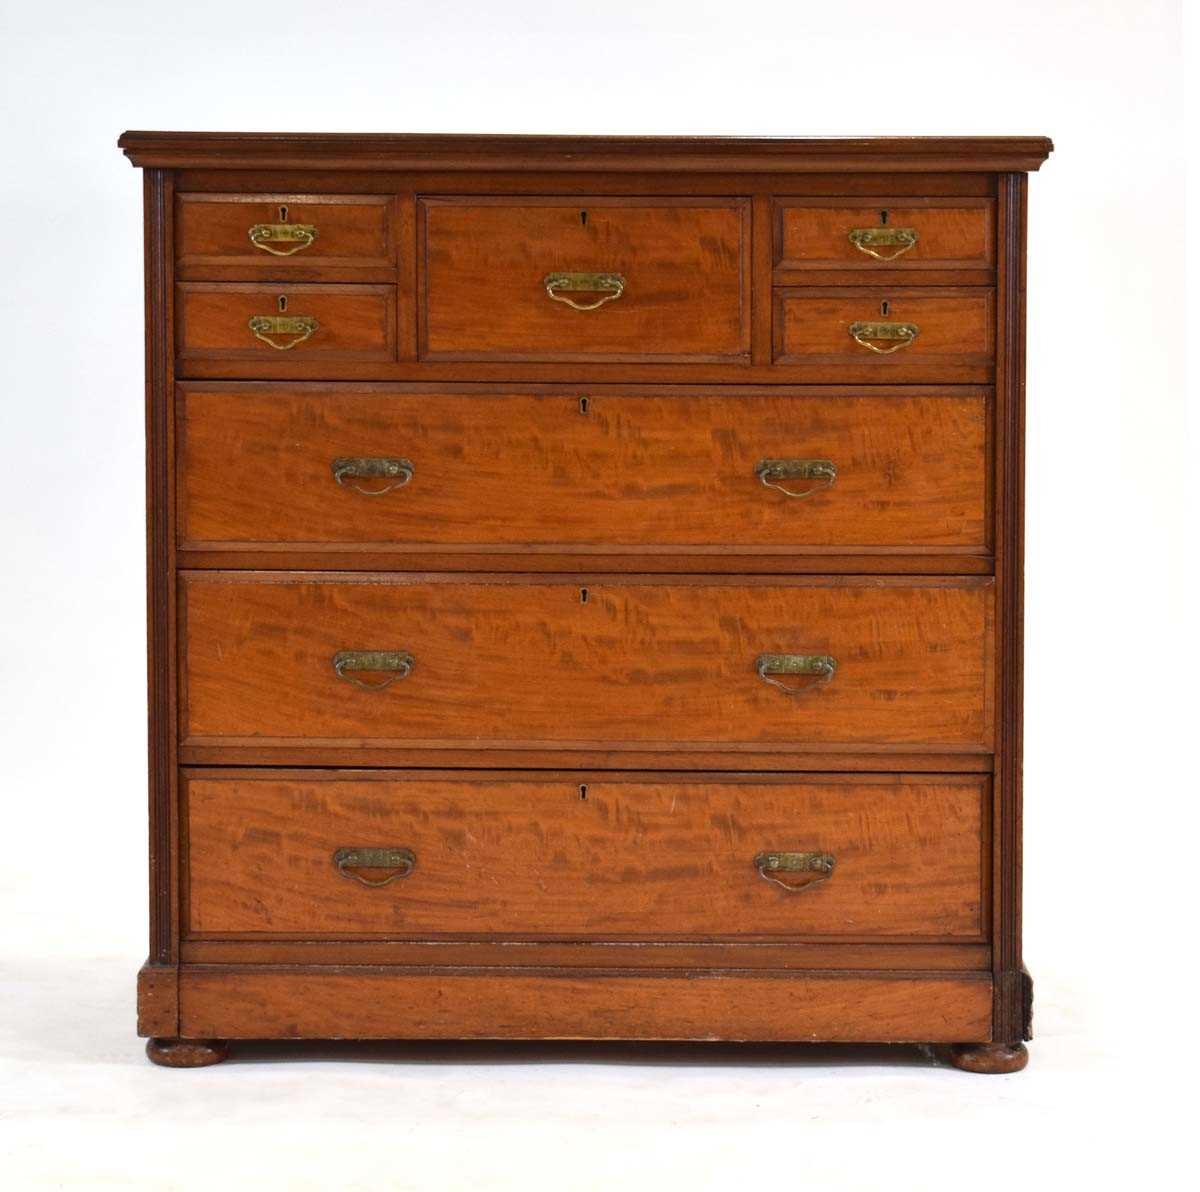 A late 19th century mahogany chest of eight drawers by James Shoolbred & Co., on a plinth base,